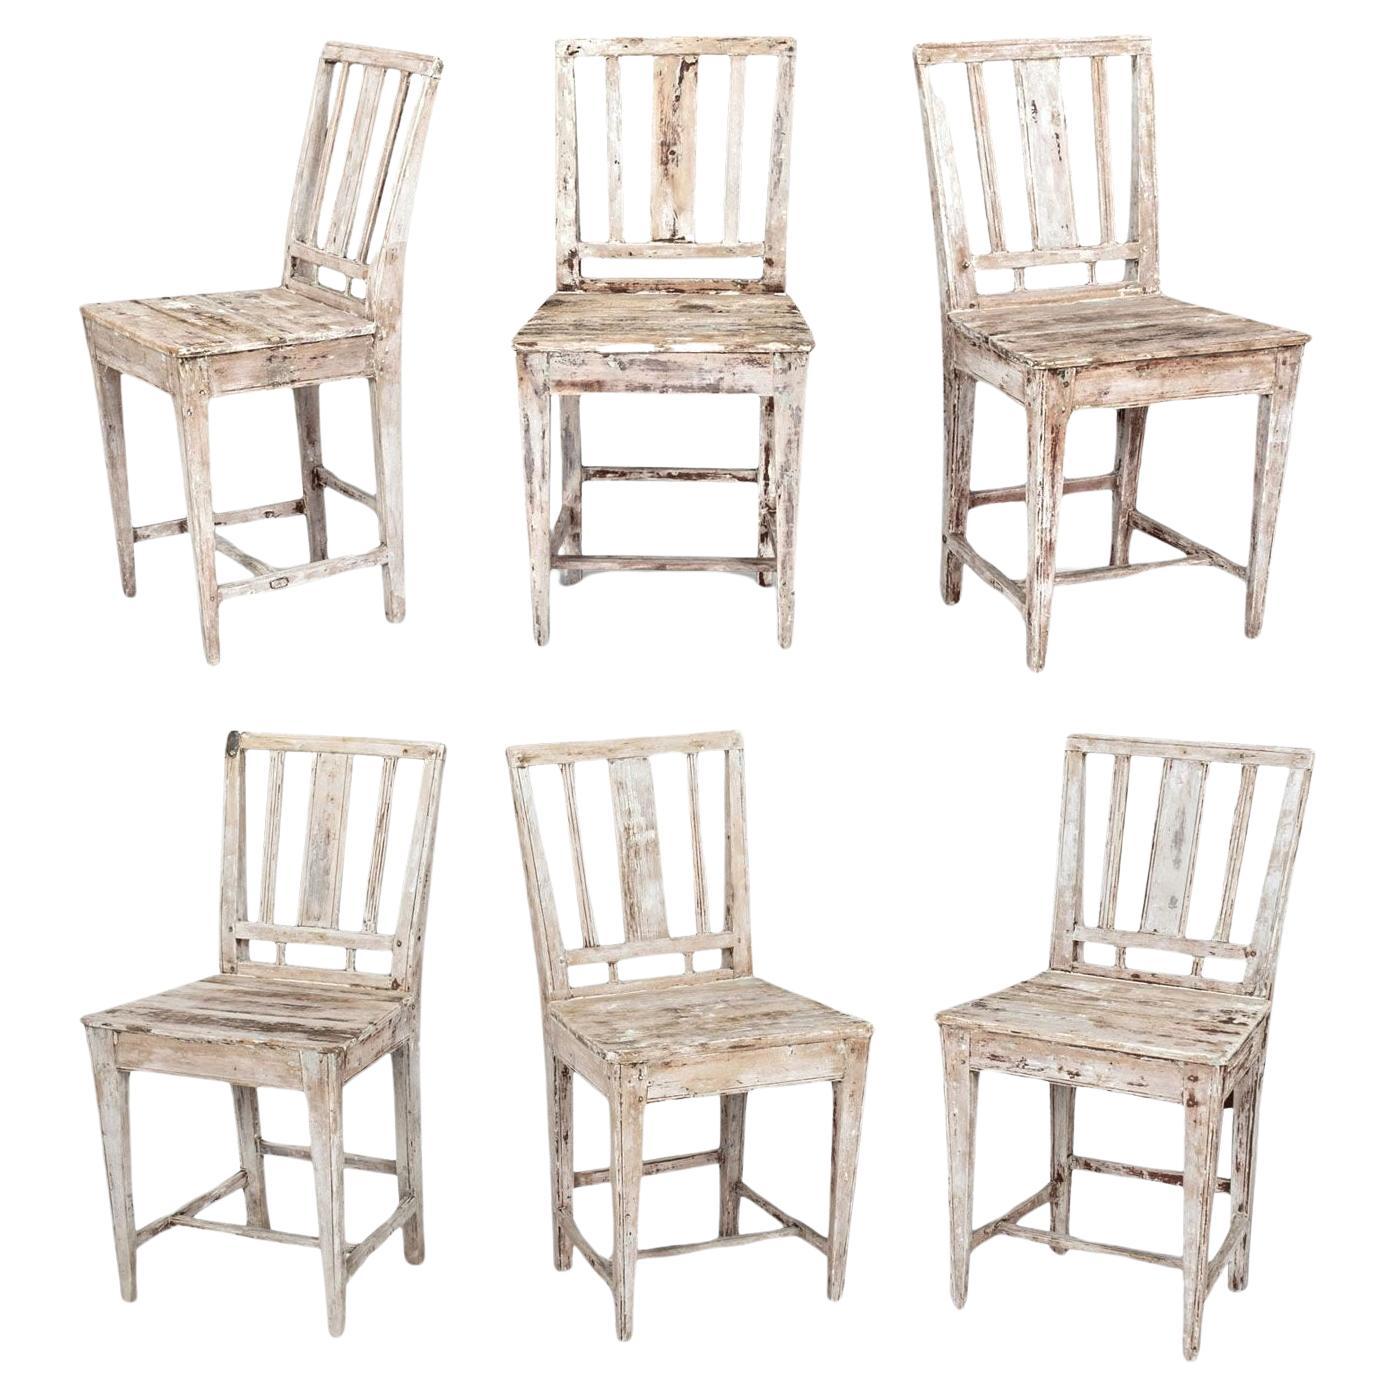 Set of Six Early 19th Century Painted Swedish Farm Dining Chairs